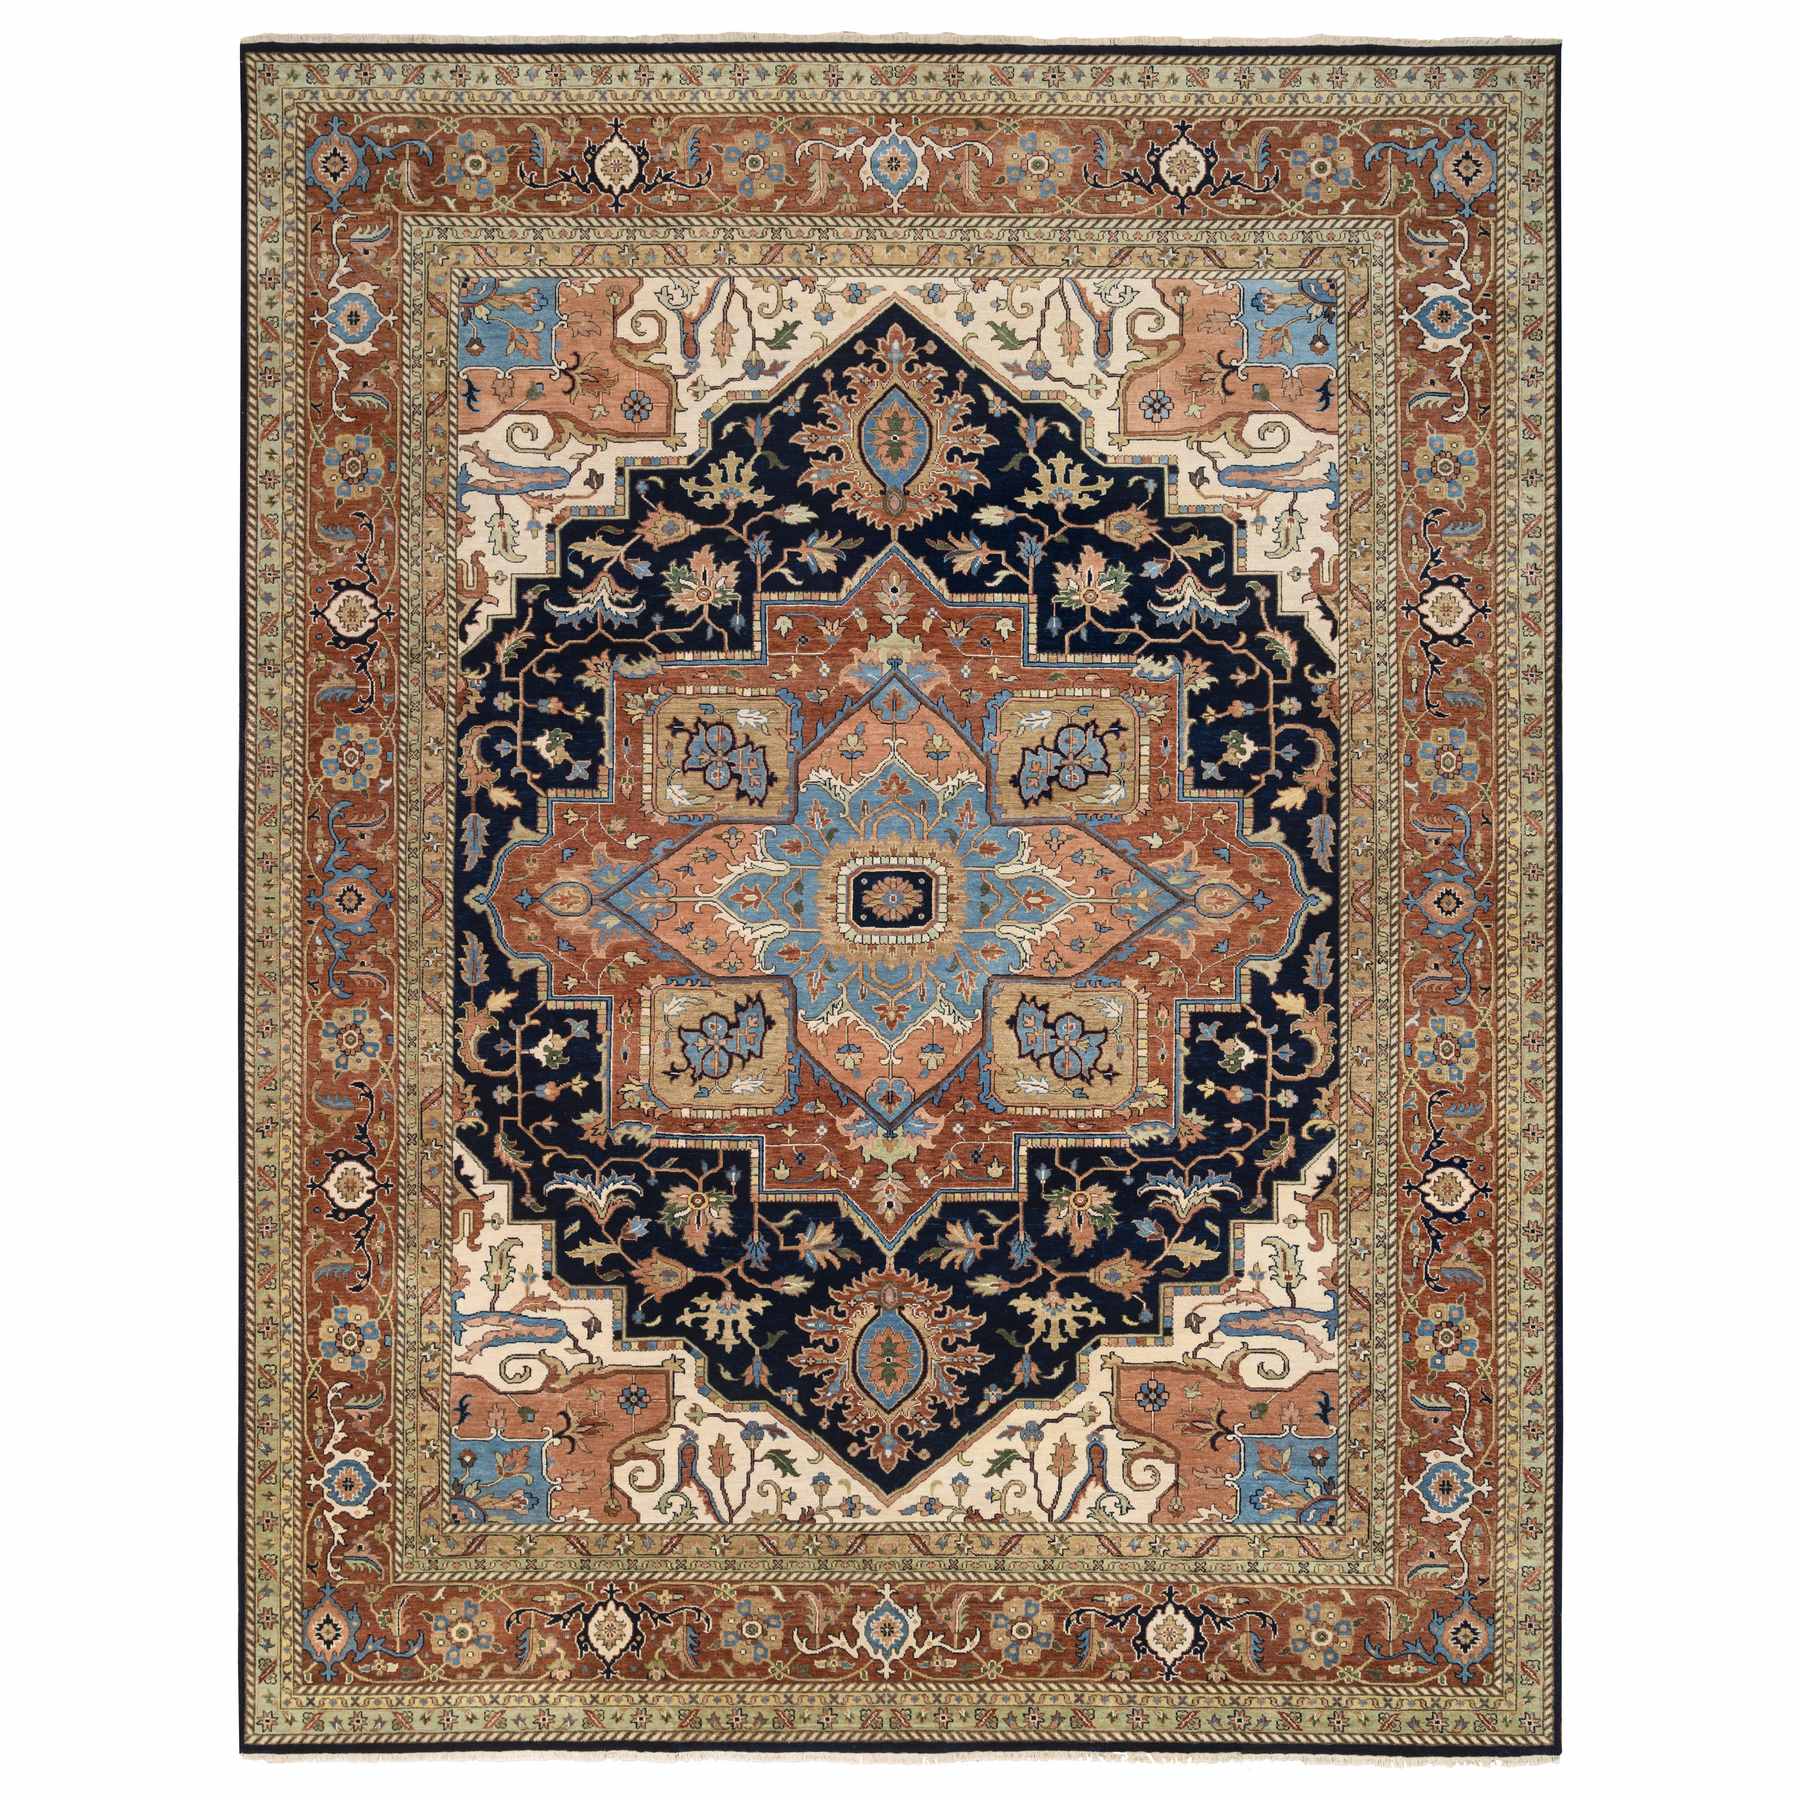 12'x15'4" Navy and Rust, Heriz with Classic Geometric Medallion Design, Thick and Plush Pure Wool Hand Woven, Oversized Oriental Rug 